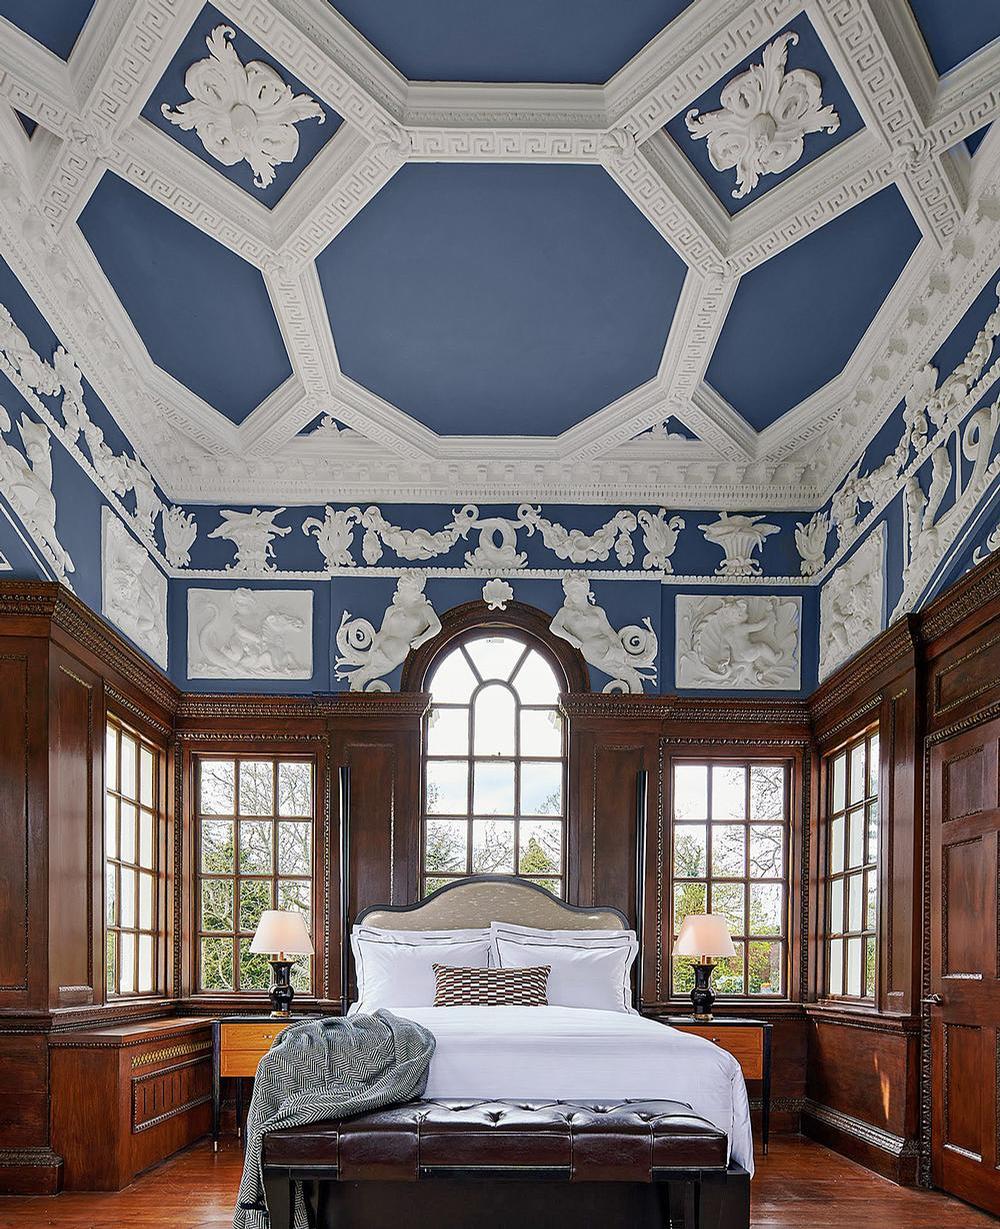 The bedrooms have a country house feel and look out over the River Thames